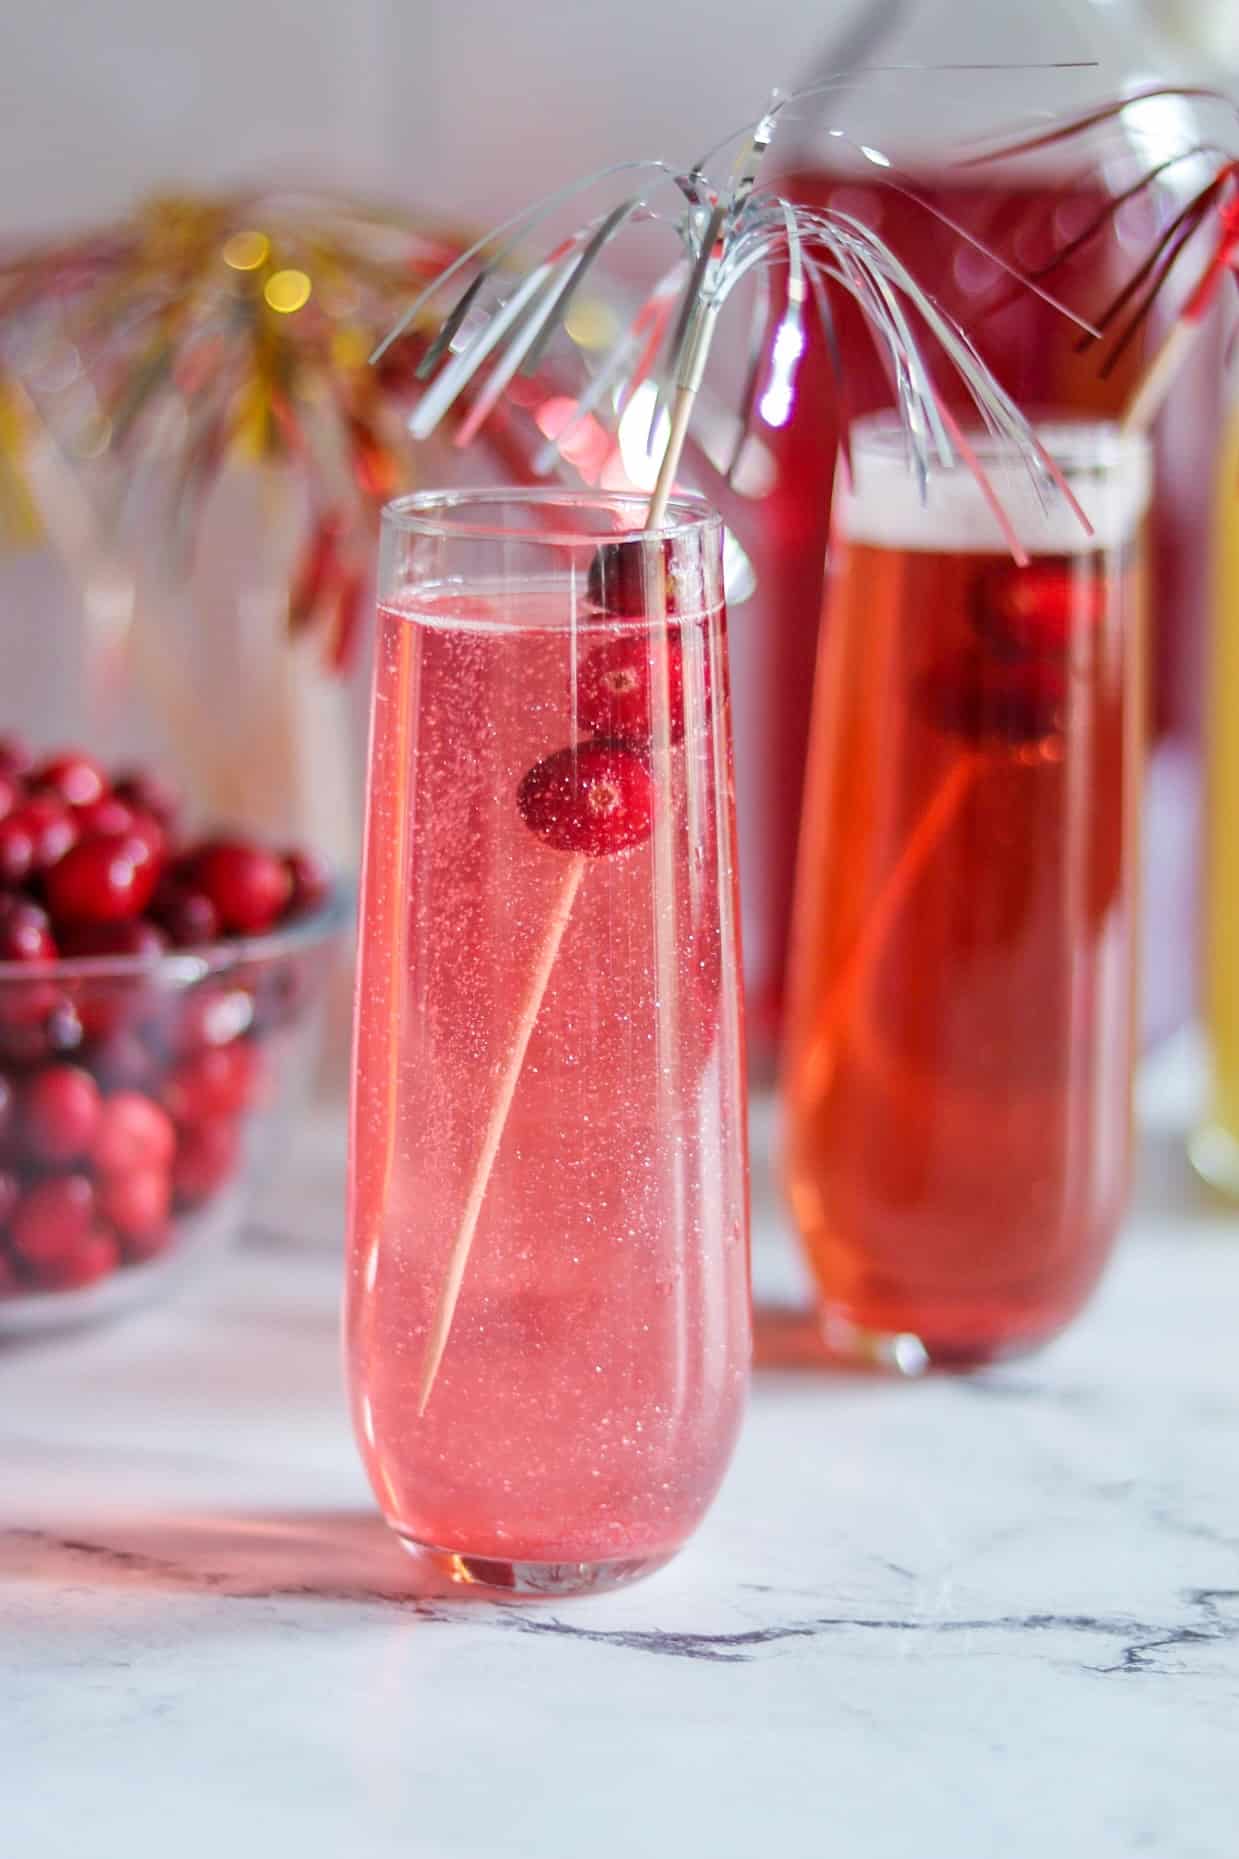 Cranberry Sparkler gin prosecco cocktail with edible glitter for New Year's Eve